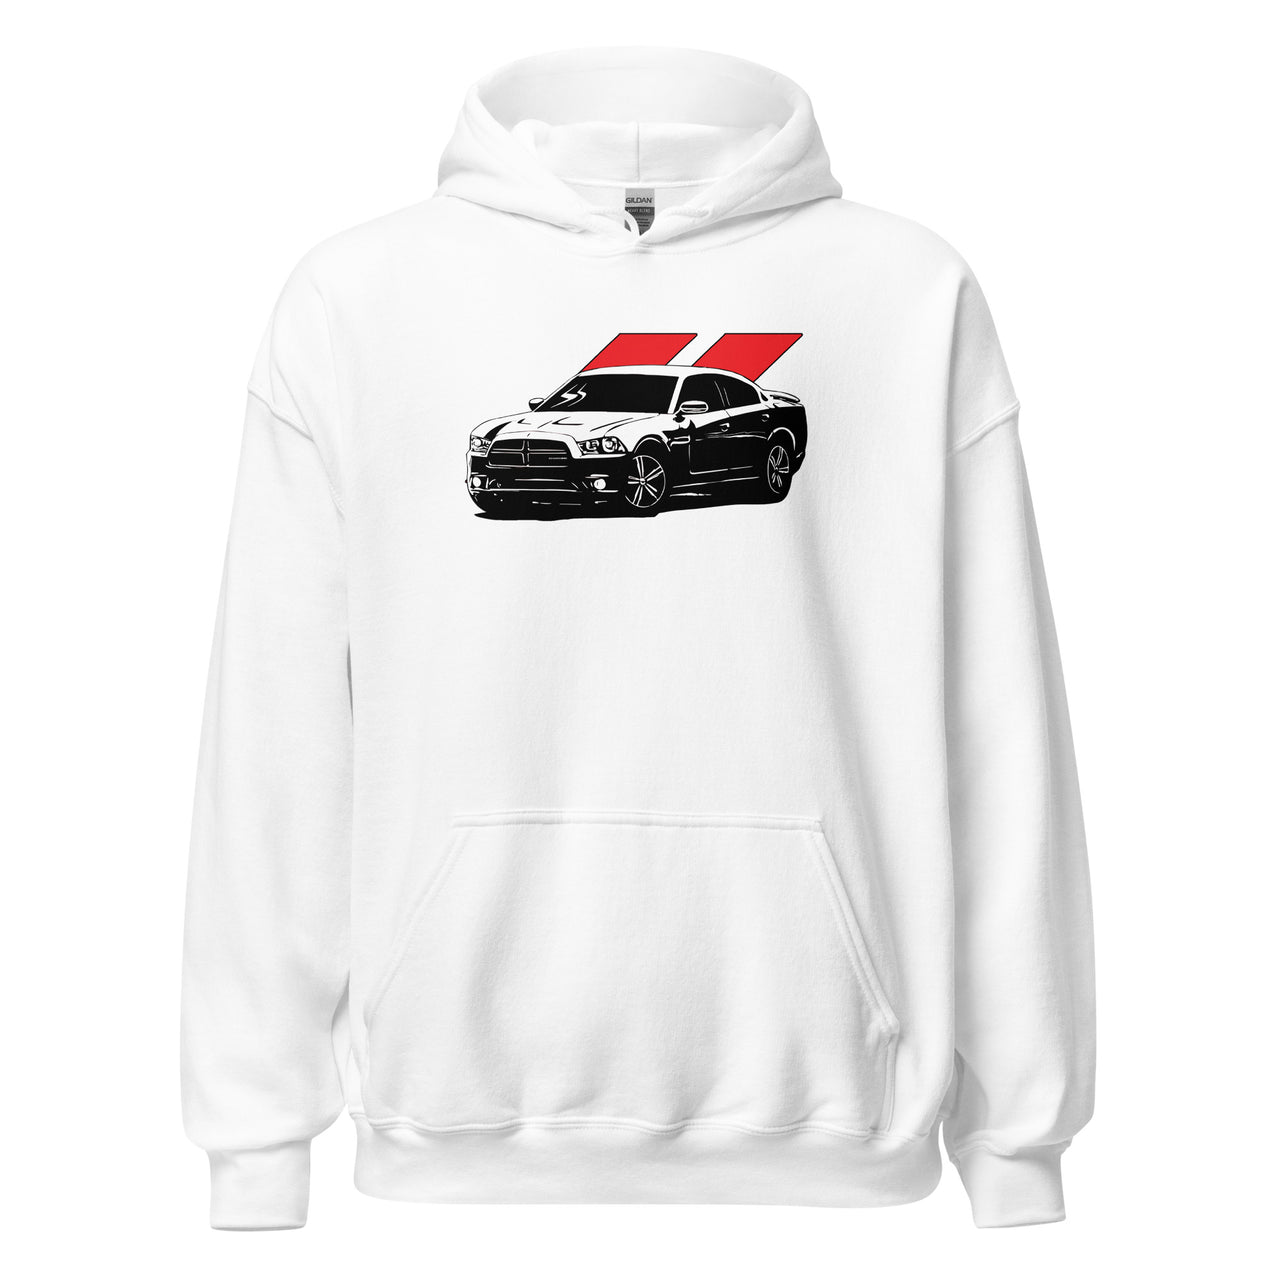 2010-2014 Charger Hoodie in white